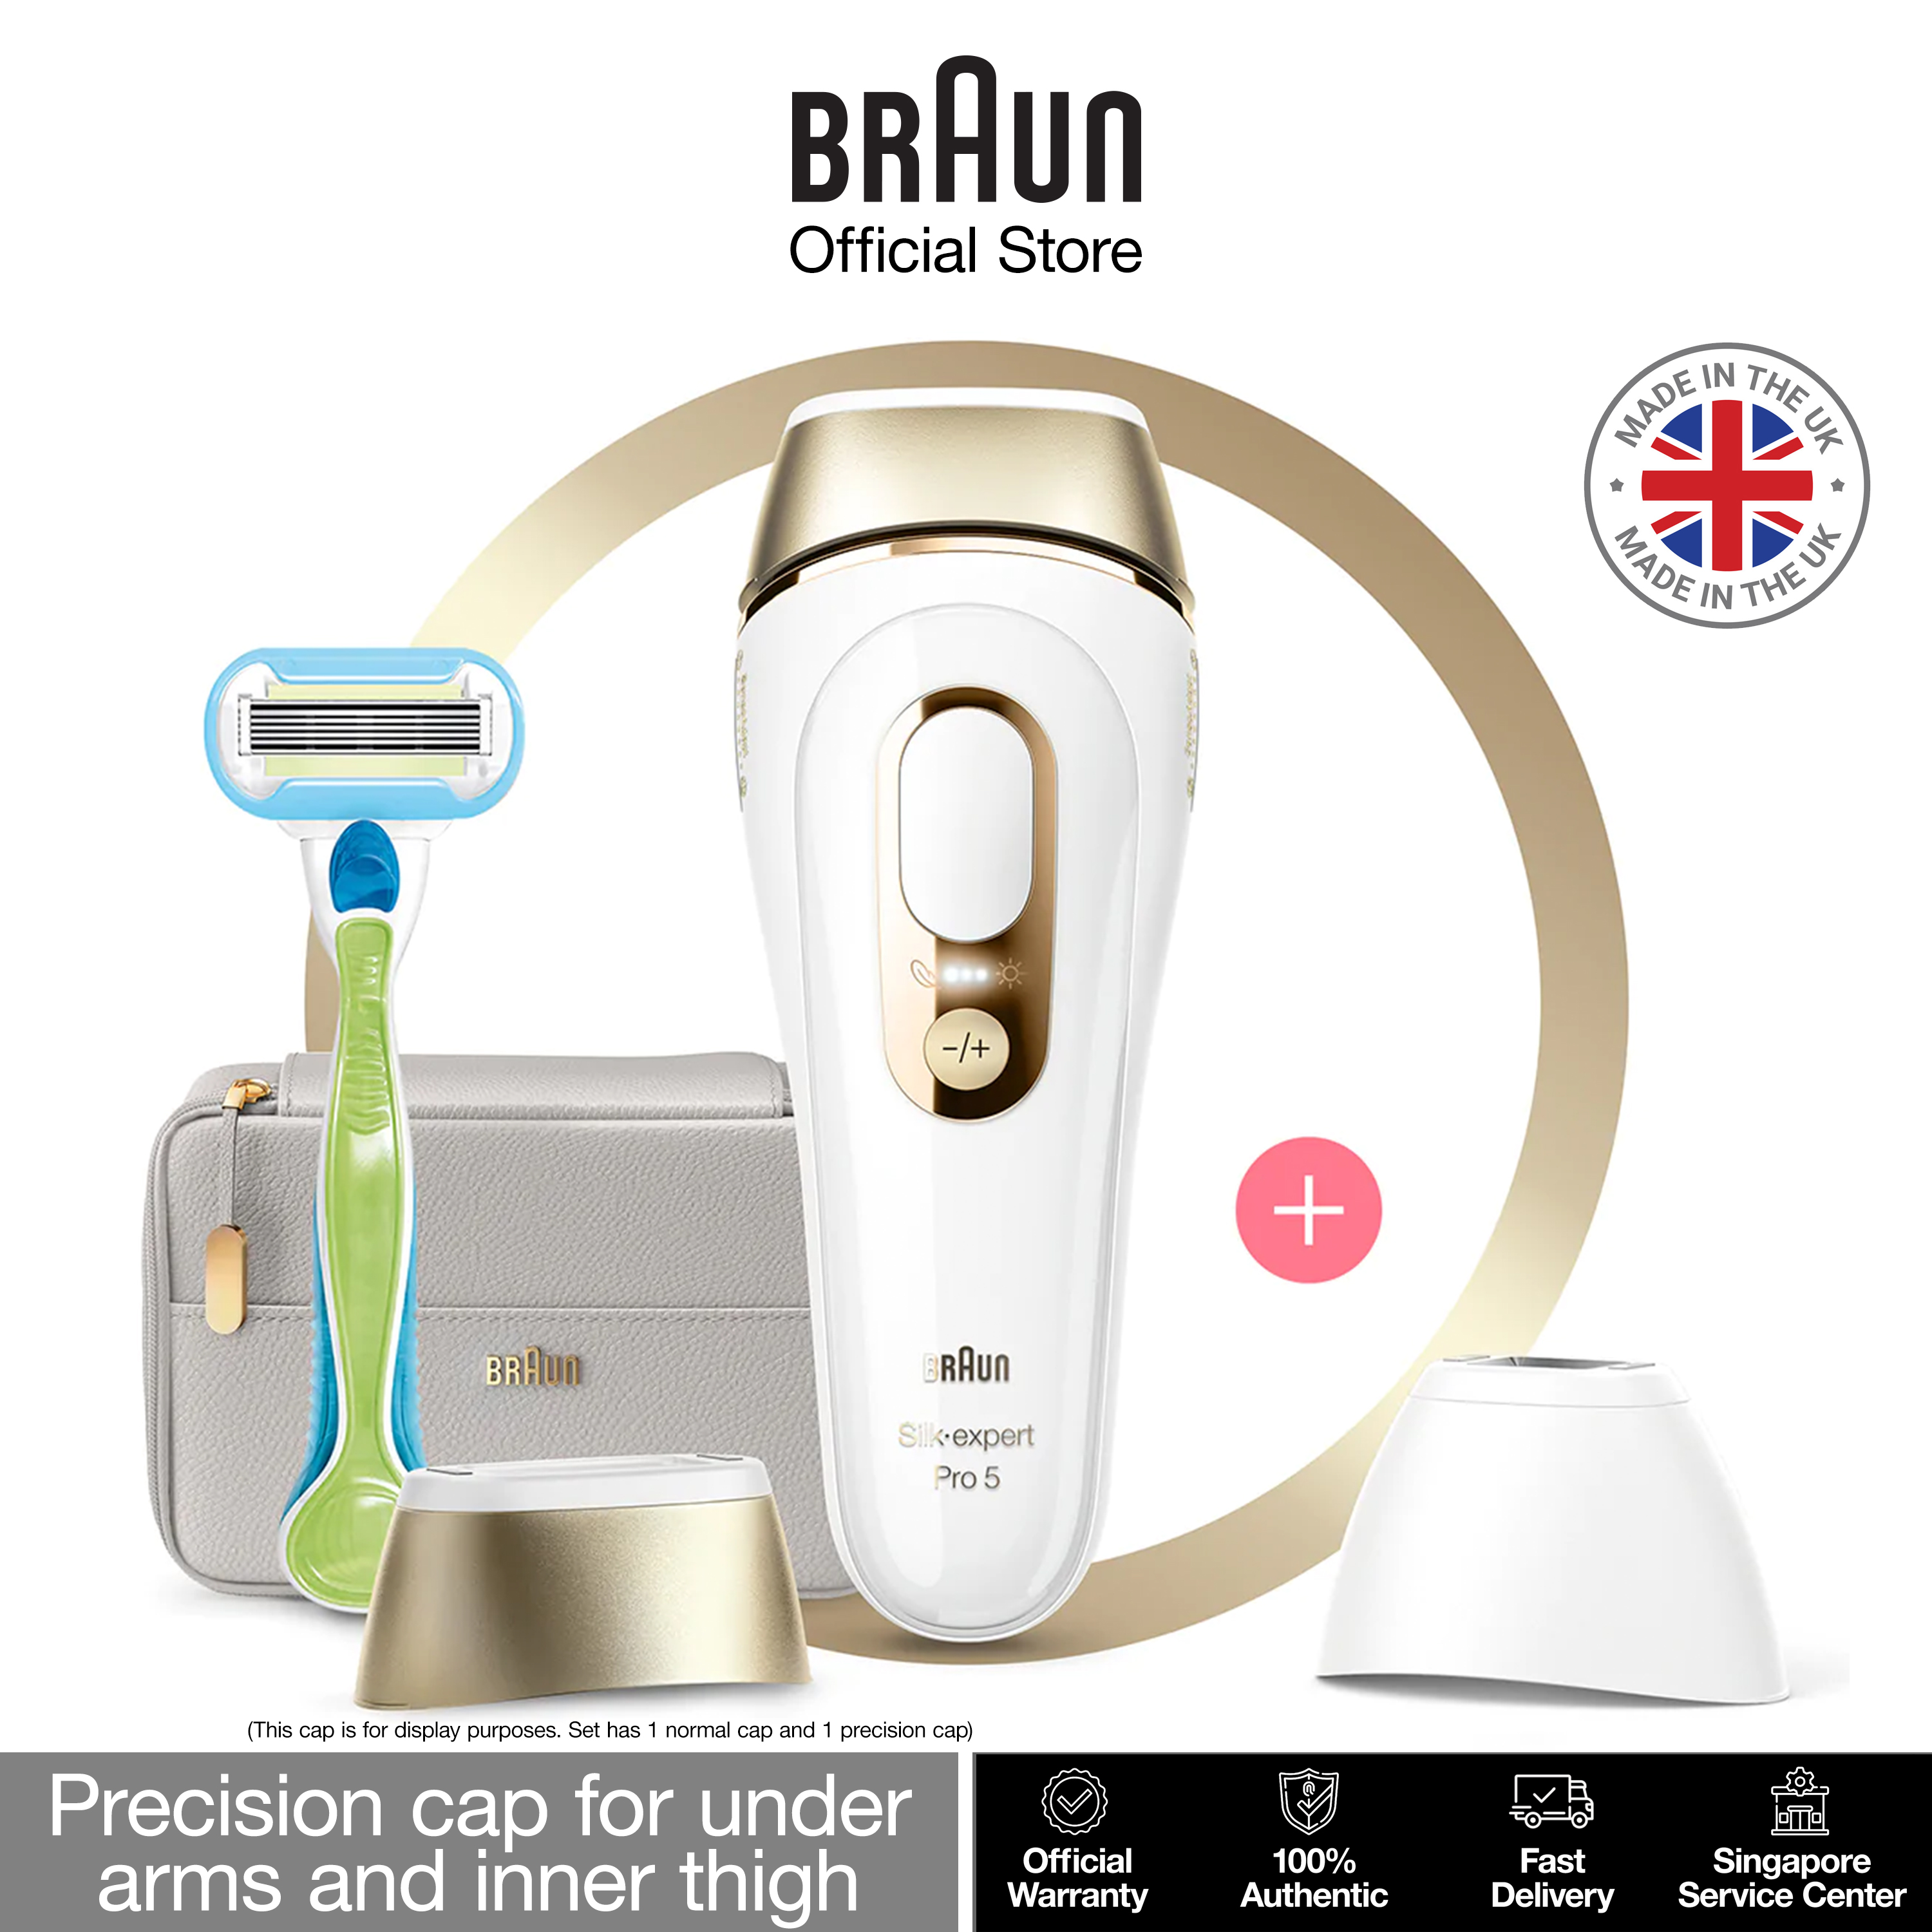 Braun IPL Silk expert Pro 5 PL 5154 IPL Permanent Hair Removal for Women  with Pouch and Precision Cap Intense Pulsed Light | Lazada Singapore